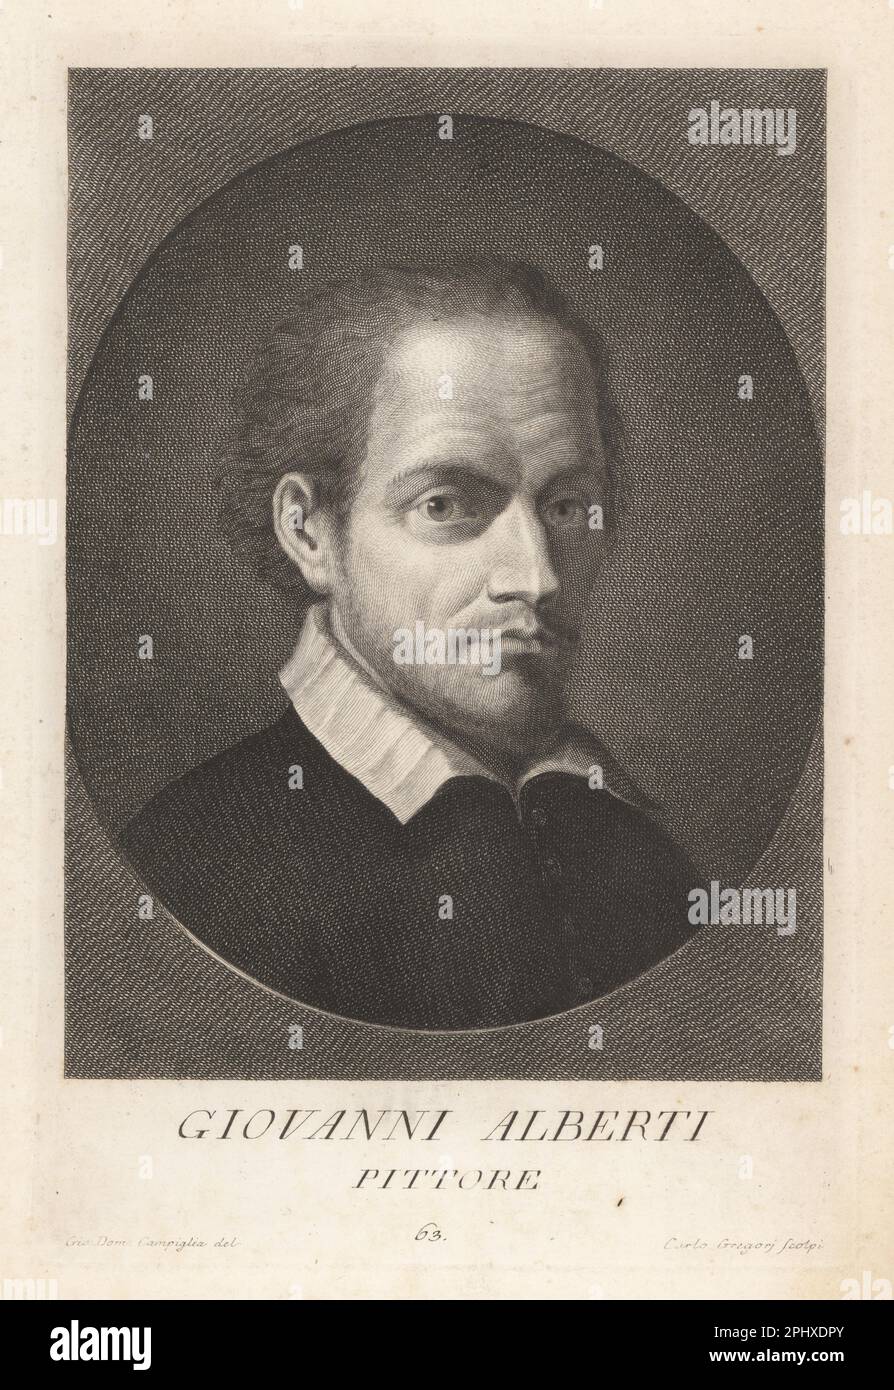 Giovanni Alberti, Italian painter, poet and art critic, 1558–1601. Known for his perspective painting (quadratura) in landscapes. Brother of Cherubino Alberti. Copperplate engraving by Carlo Gregori after Giovanni Domenico Campiglia after a self portrait by the artist from Francesco Moucke's Museo Florentino (Museum Florentinum), Serie di Ritratti de Pittori (Series of Portraits of Painters) stamperia Mouckiana, Florence, 1752-62. Stock Photo